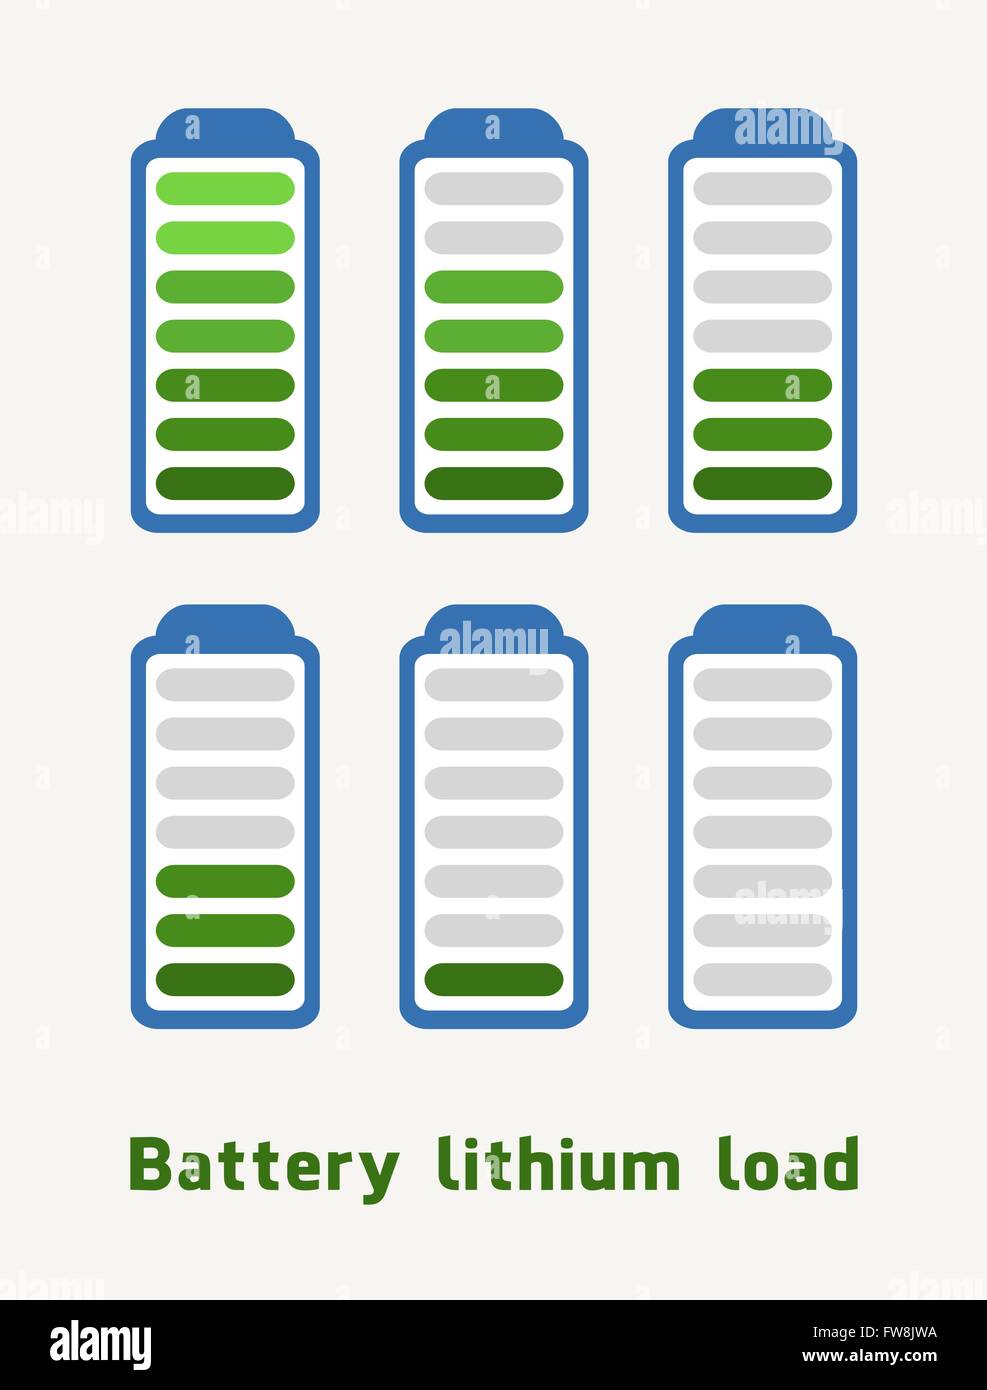 Battery lithium load in green and blue colors Stock Vector